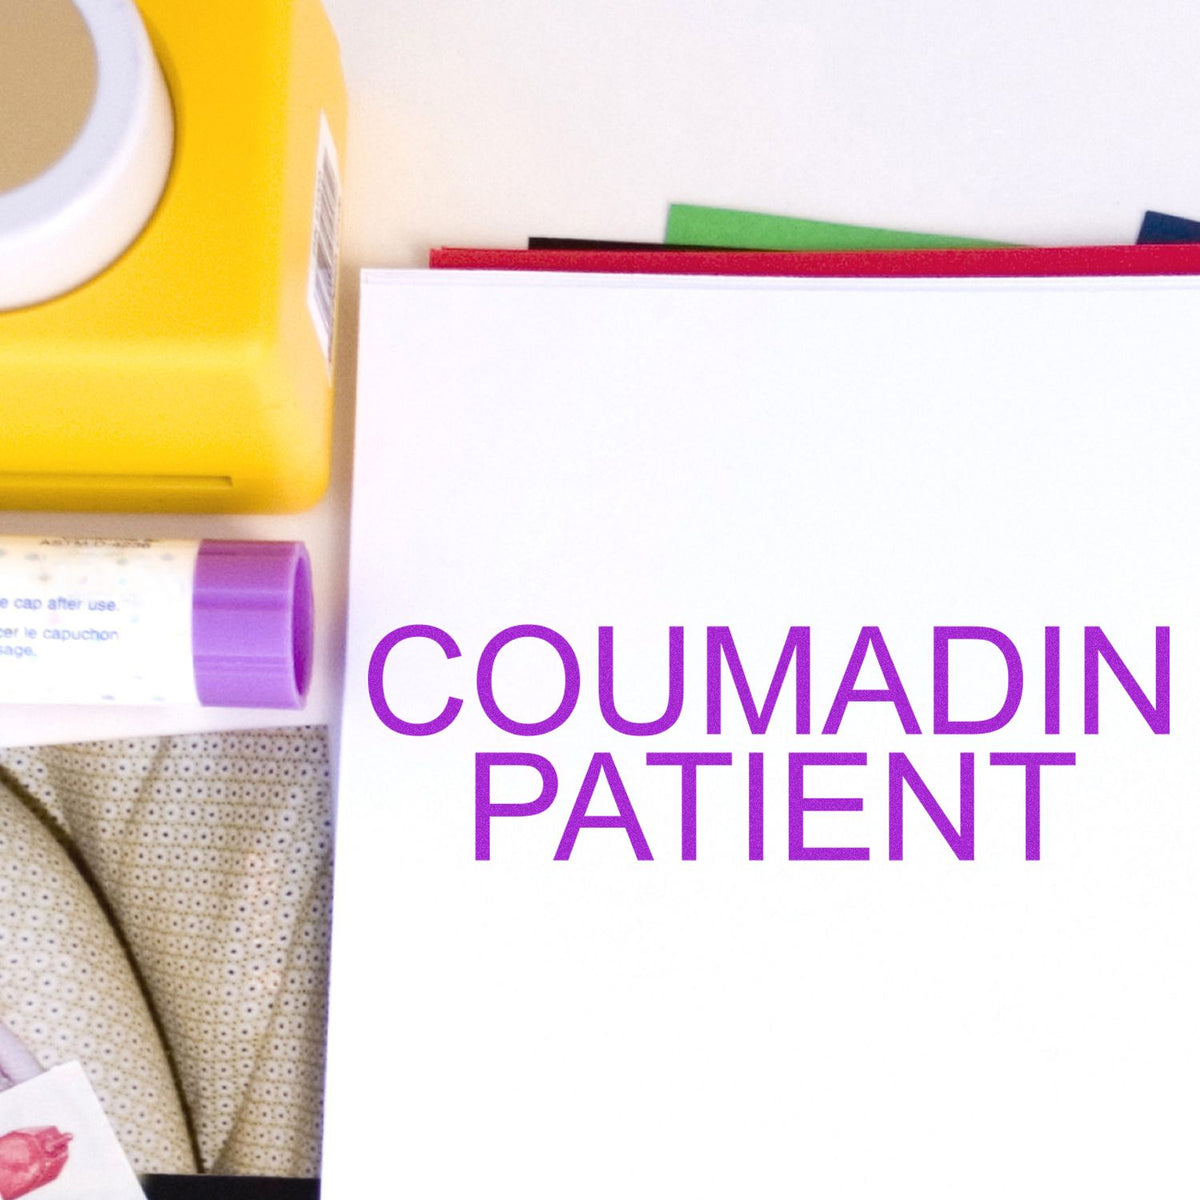 Large Pre-Inked Coumadin Patient Stamp In Use